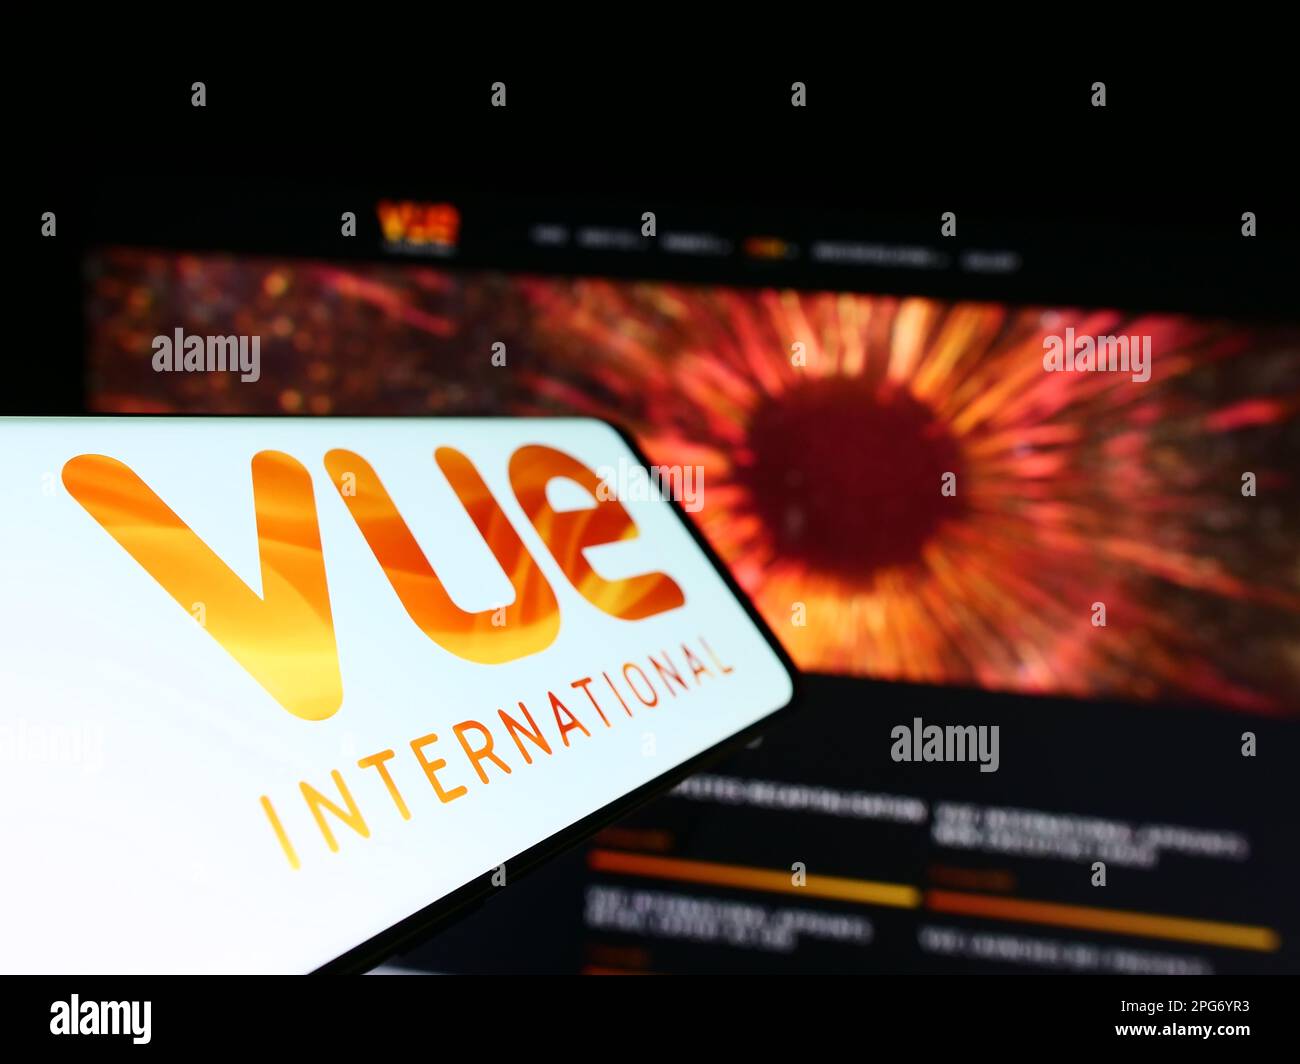 Mobile phone with logo of entertainment company Vue International on screen in front of business website. Focus on center-left of phone display. Stock Photo